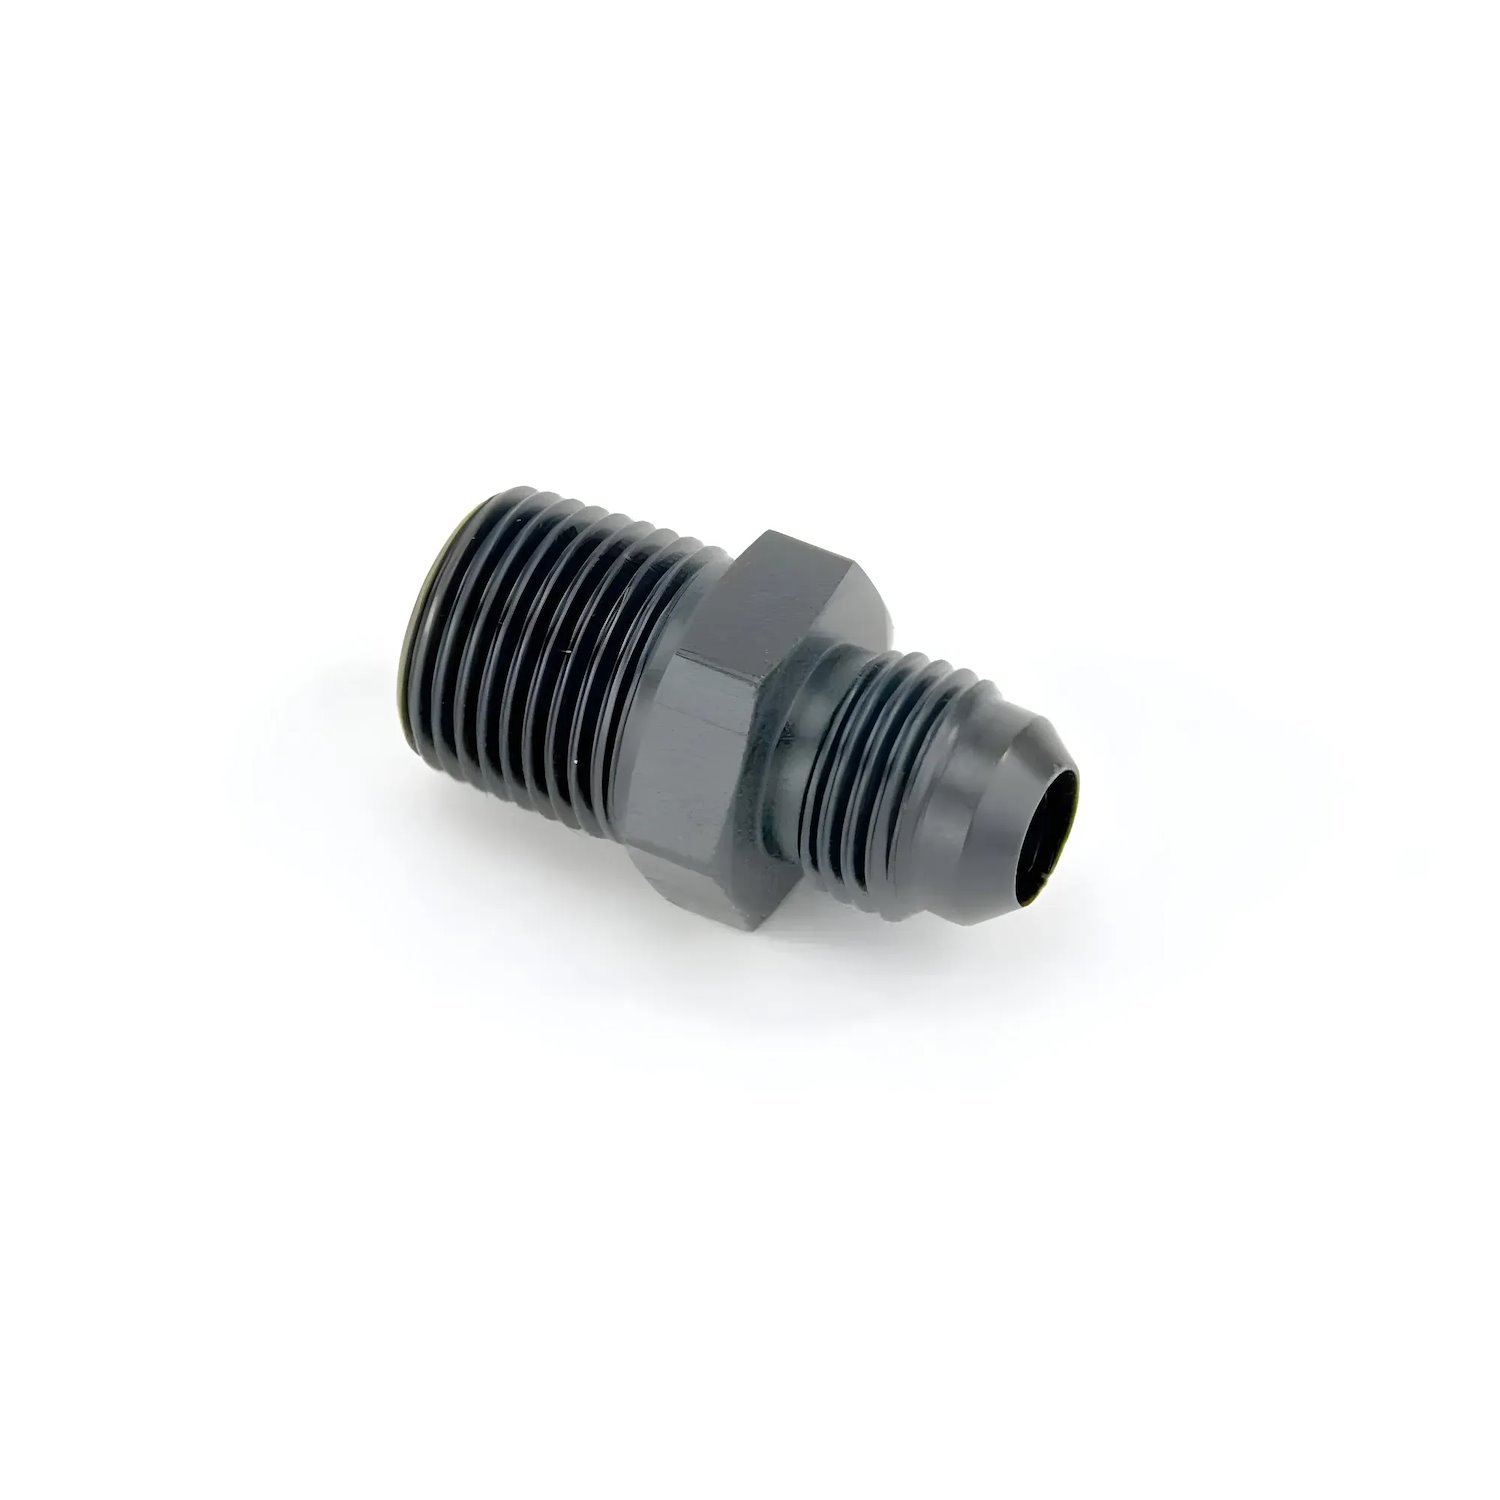 00-01160 3/8 in. NPT x 6AN Straight Fitting- Male/Male, Black